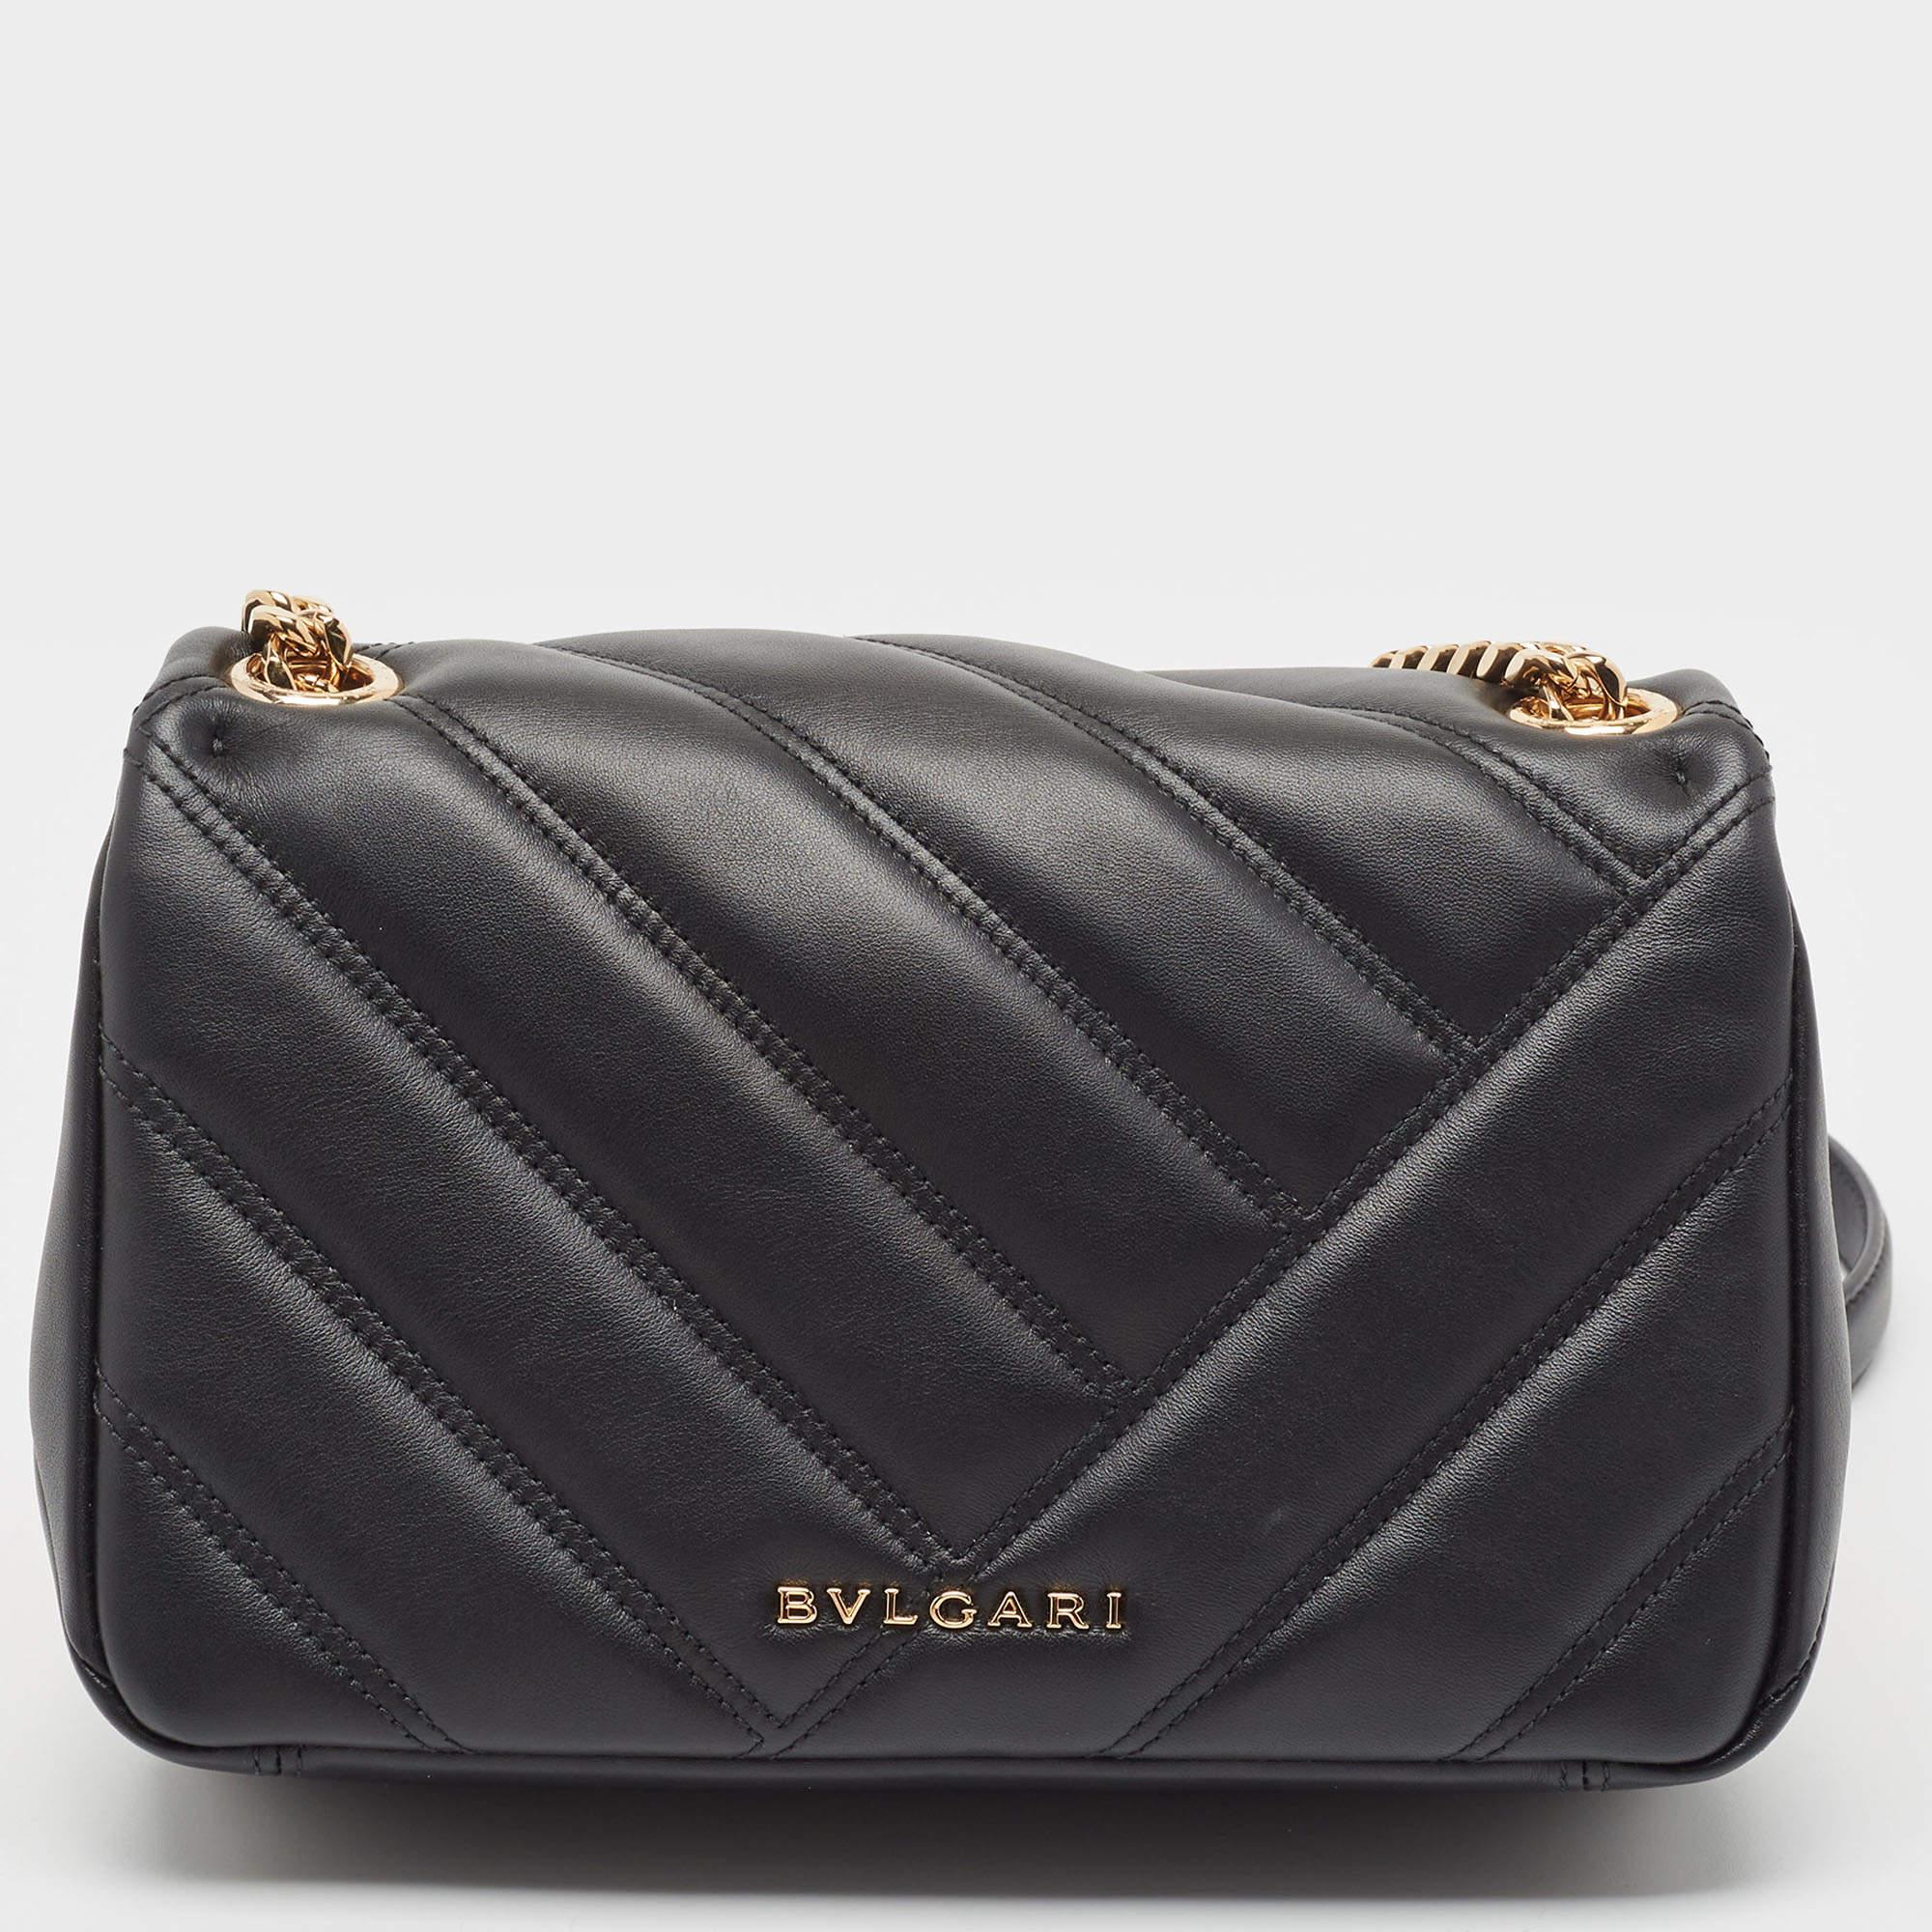 Structured, sophisticated, and stylish are some words that describe this Bvlgari shoulder bag! Crafted from the best quality material, the creation is adorned with the label's signature appeal and equipped with a well-spaced interior. Carry it to